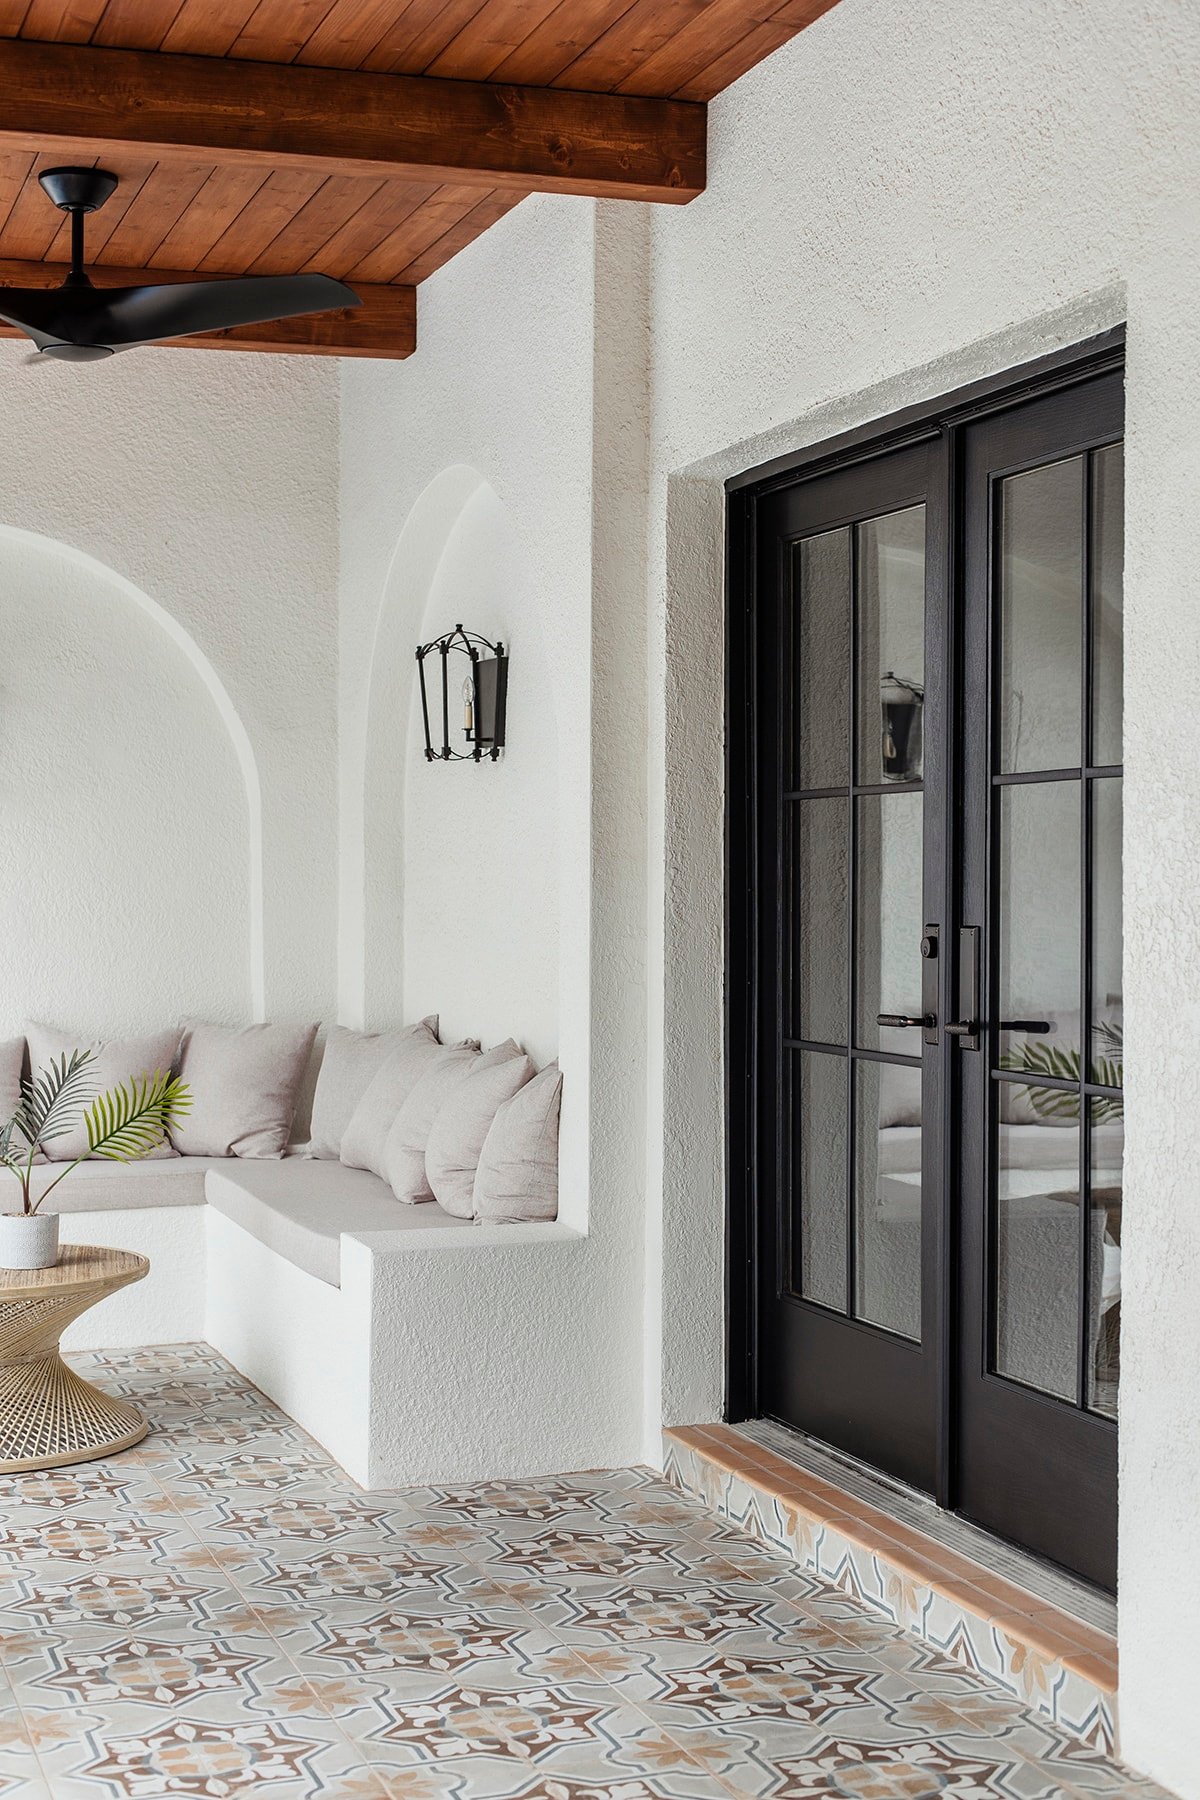 spanish style porch with wood beam ceiling, patterned tile and black french doors